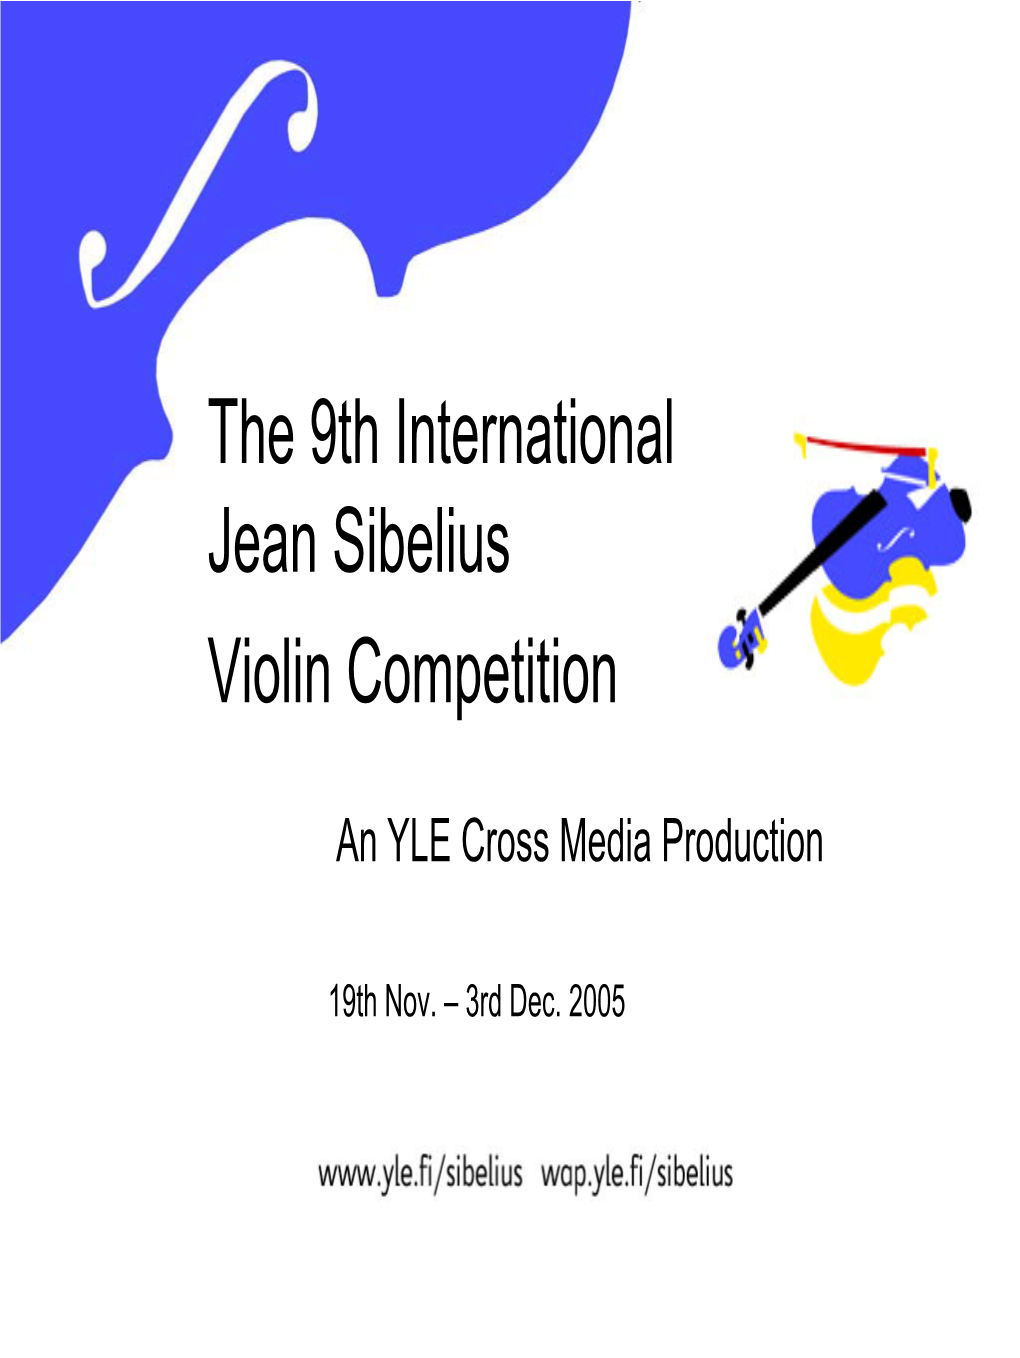 The 9Th International Jean Sibelius Violin Competition